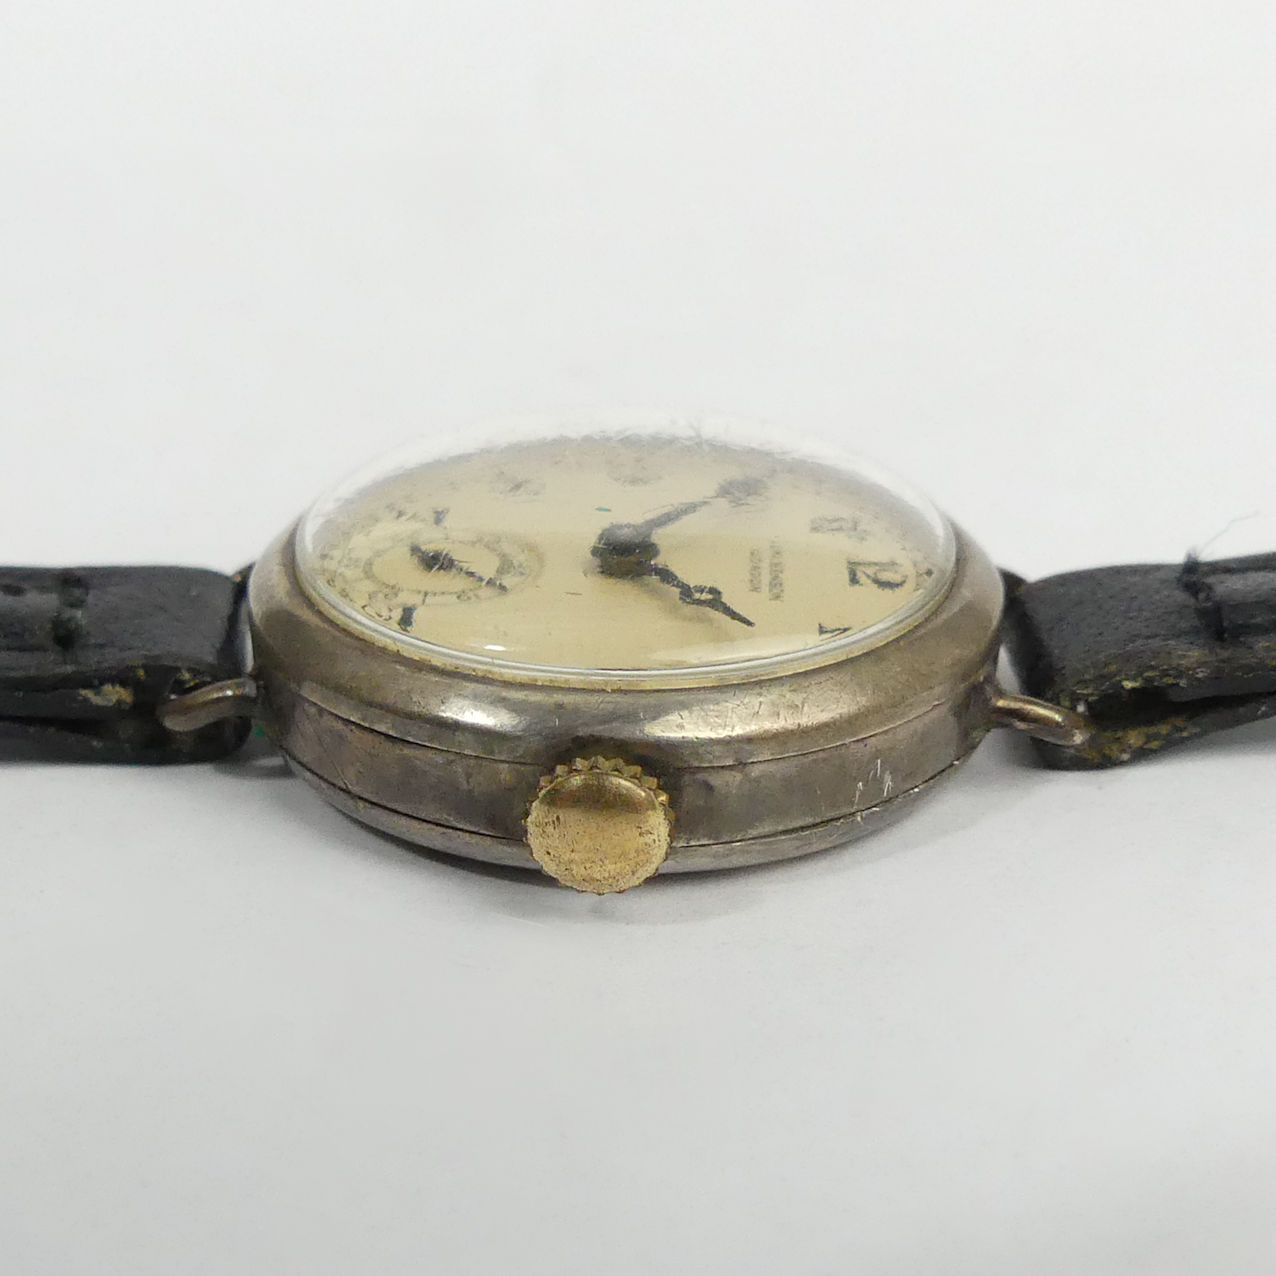 Early J W Benson silver cased manual wind watch, Birm.1913. 28 mm inc. button. UK Postage £12. - Image 2 of 5